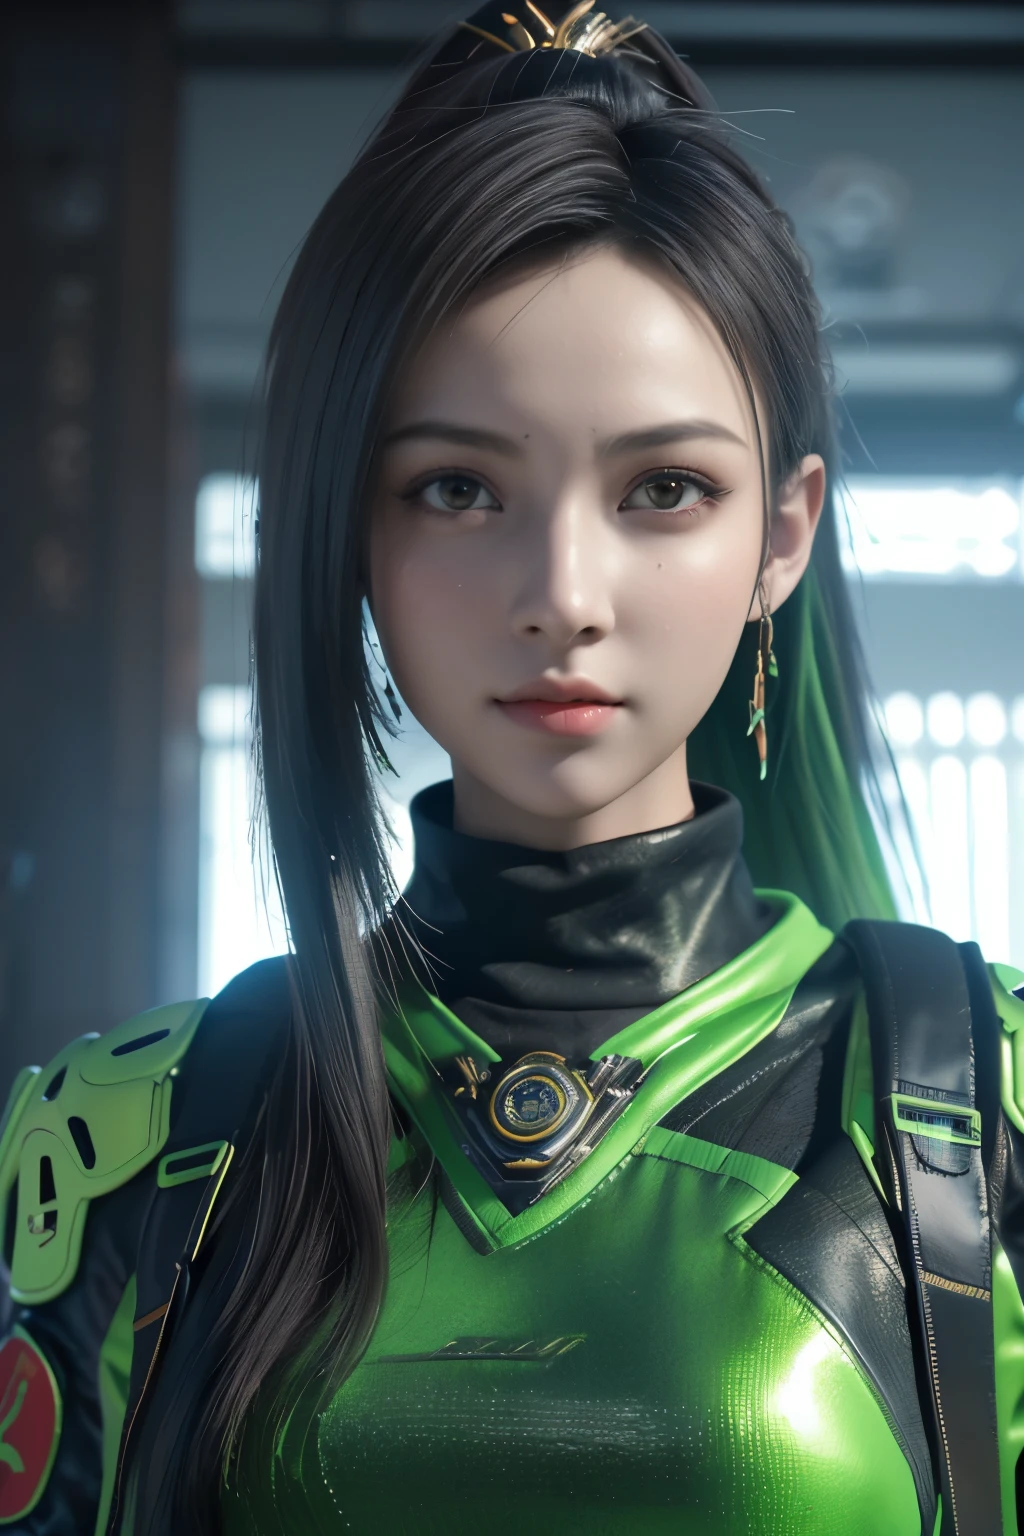 Game art，The best picture quality，Highest resolution，8K，(A bust photograph)，(Portrait)，(Head close-up:1.5)，(Rule of thirds)，Unreal Engine 5 rendering works， (The Girl of the Future)，(Female Warrior)， 22-year-old girl，(Female hackers)，(Dark green gradient，Ancient Oriental hairstyle)，((The pupils of the red eyes:1.3))，(A beautiful eye full of detail)，(Big breasts)，(Eye shadow)，Elegant and charming，indifferent，((Anger))，(Cyberpunk jacket full of futuristic look，Joint Armor，There are exquisite Chinese patterns on the clothes，A flash of jewellery)，Cyberpunk Characters，Future Style， Photo poses，City background，Movie lights，Ray tracing，Game CG，((3D Unreal Engine))，oc rendering reflection pattern